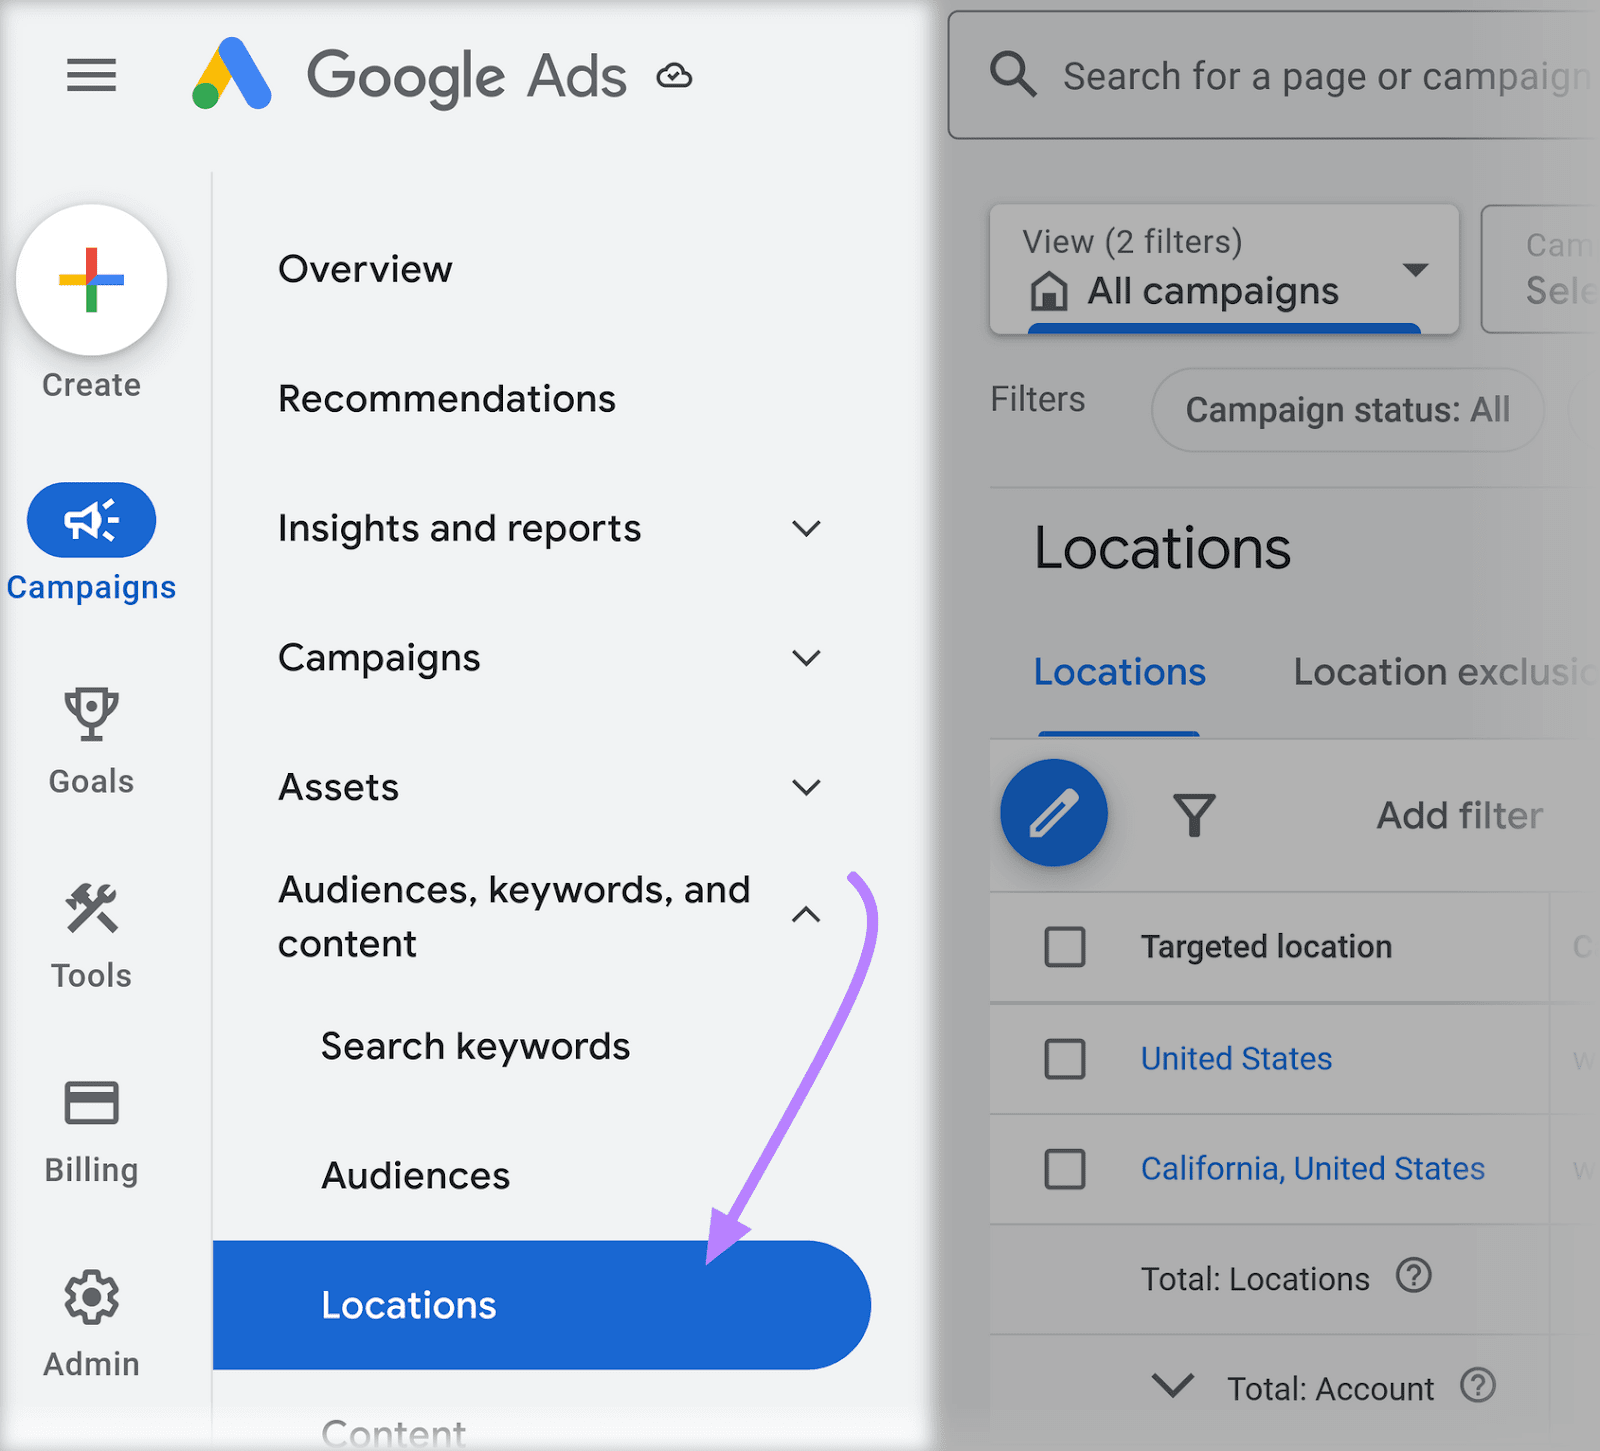 "Locations" selected from the Google Ads menu